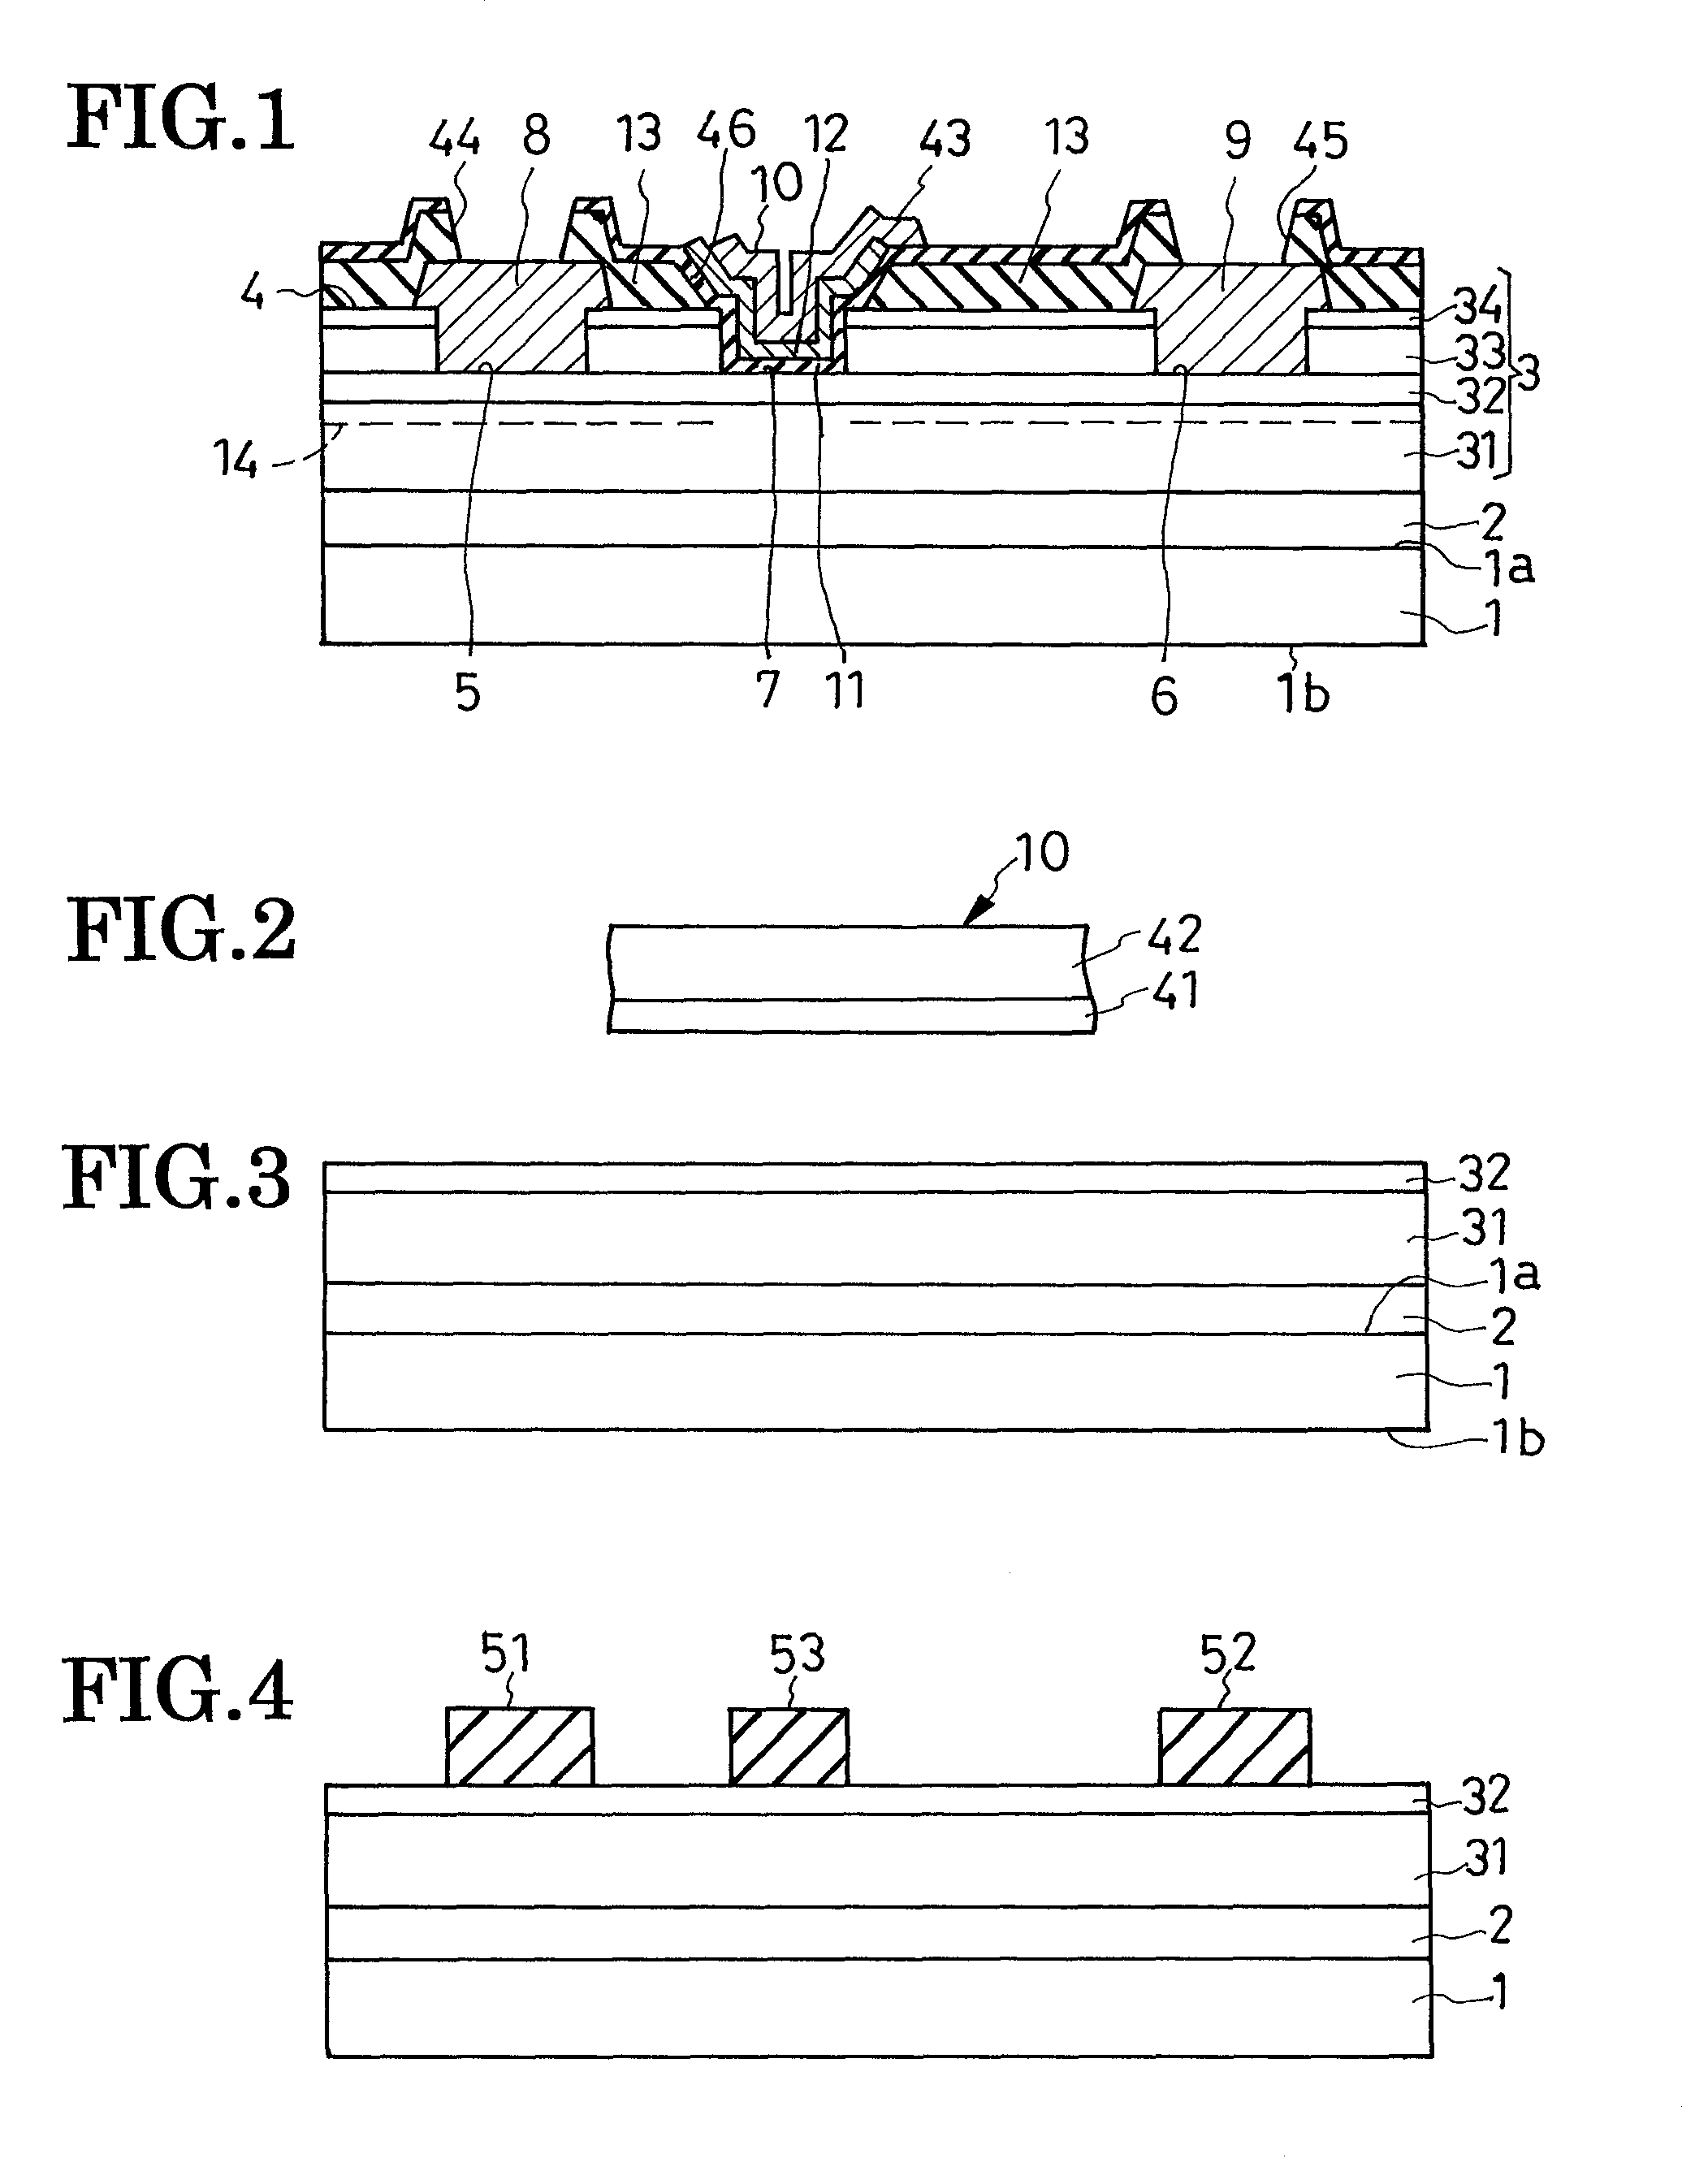 Field-effect semiconductor device